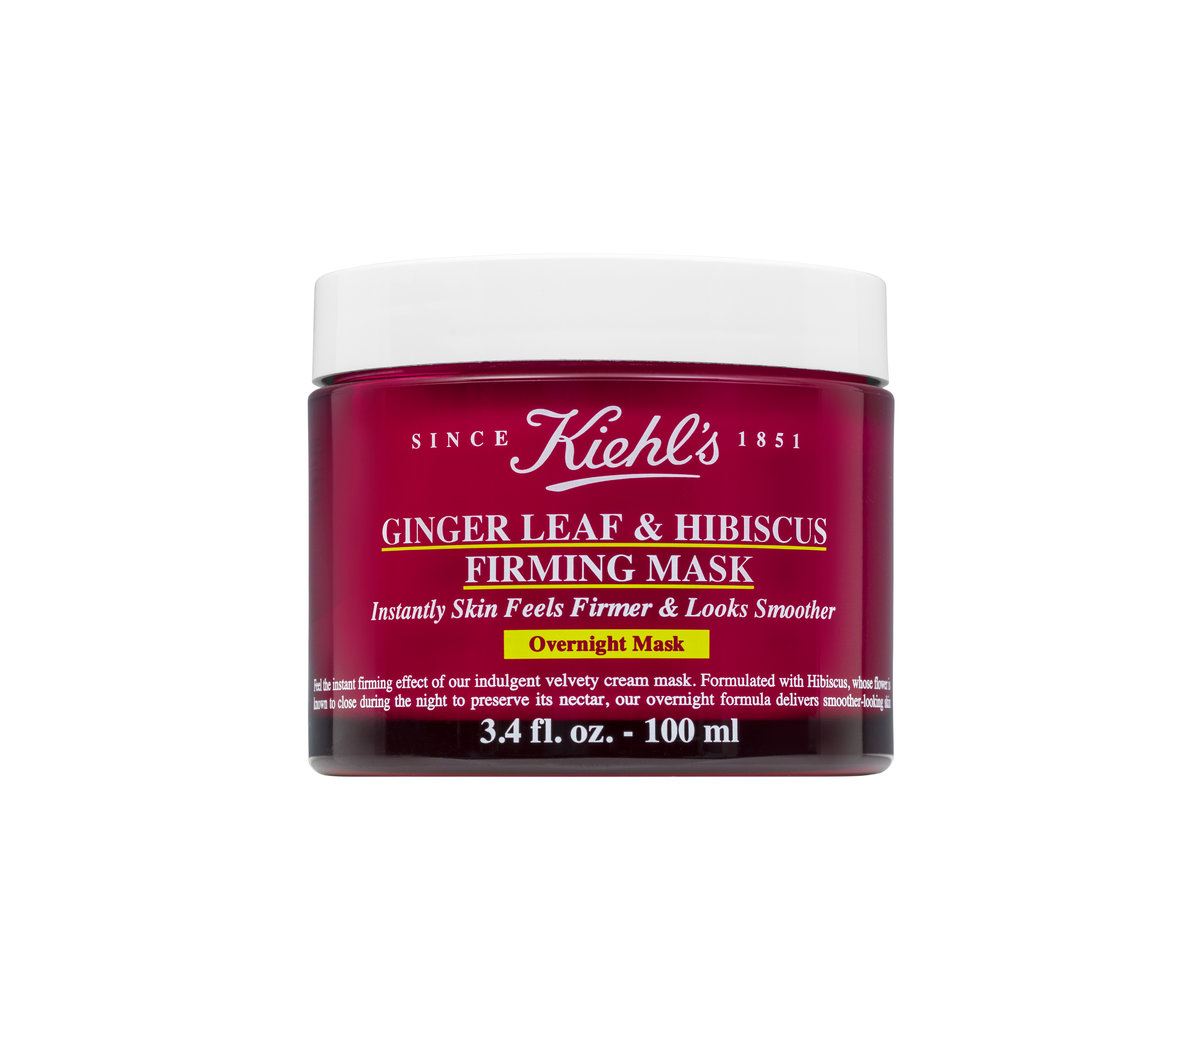 rsz_ginger_leaf_hibiscus_firming_mask_100ml